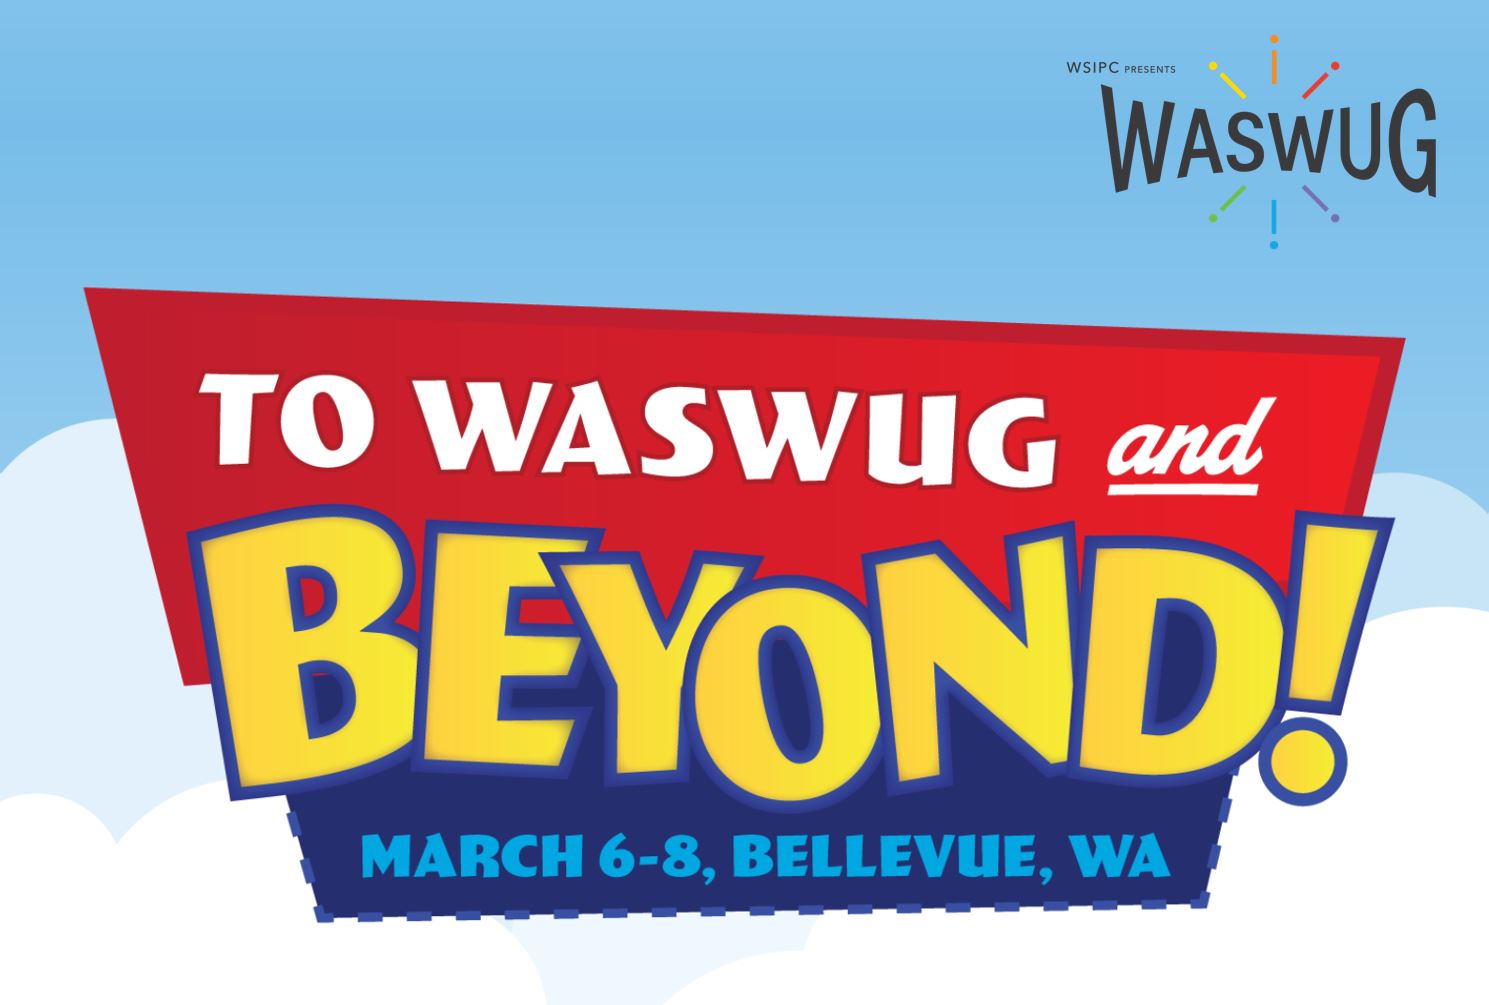 WASWUG Spring Registration is Open! WSIPC, K12 Technology Services